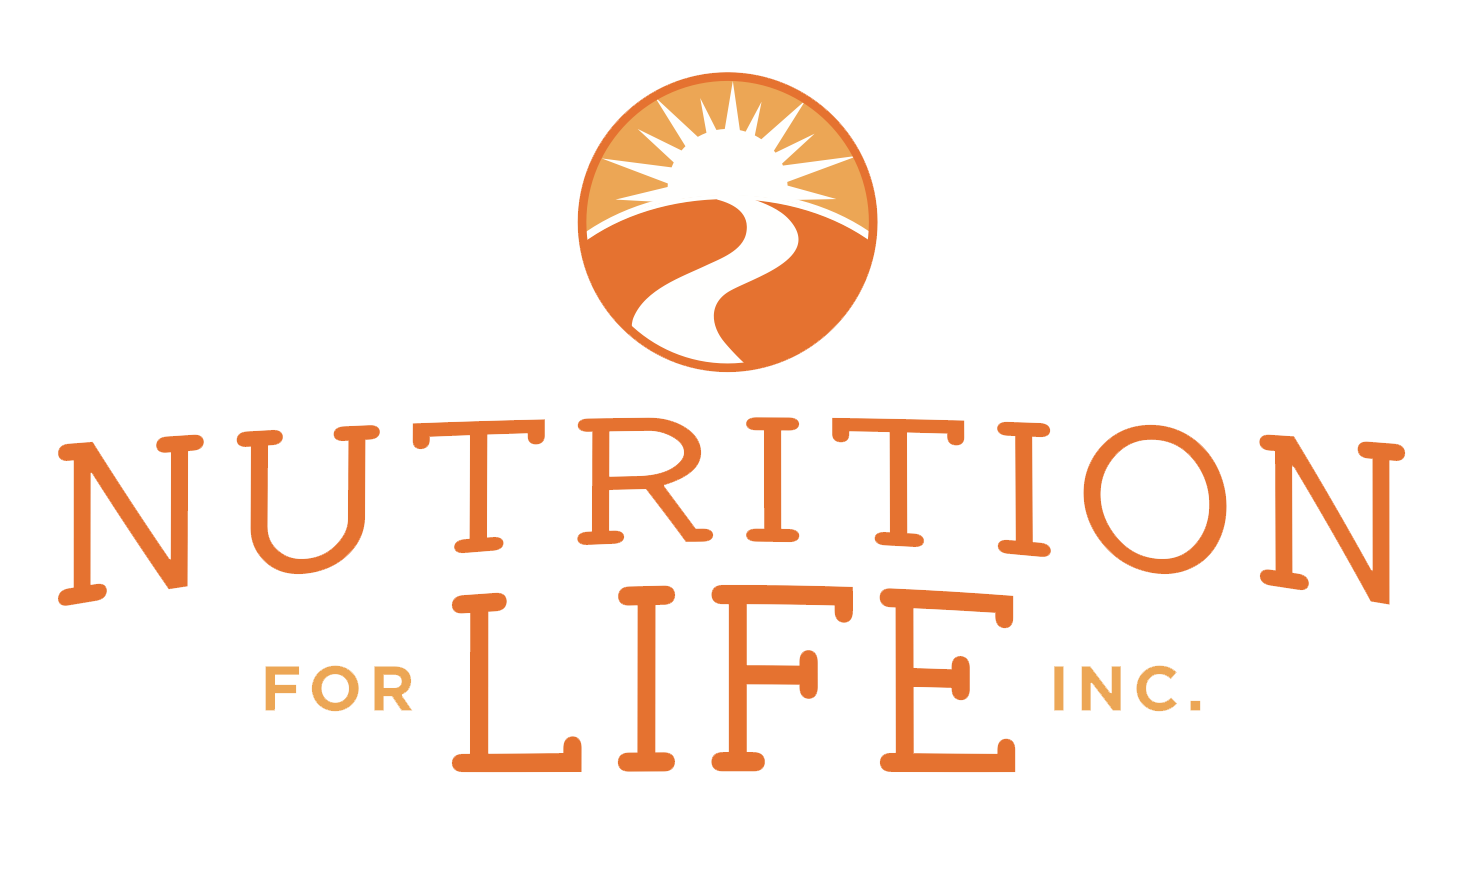 Nutrition for Life Inc.